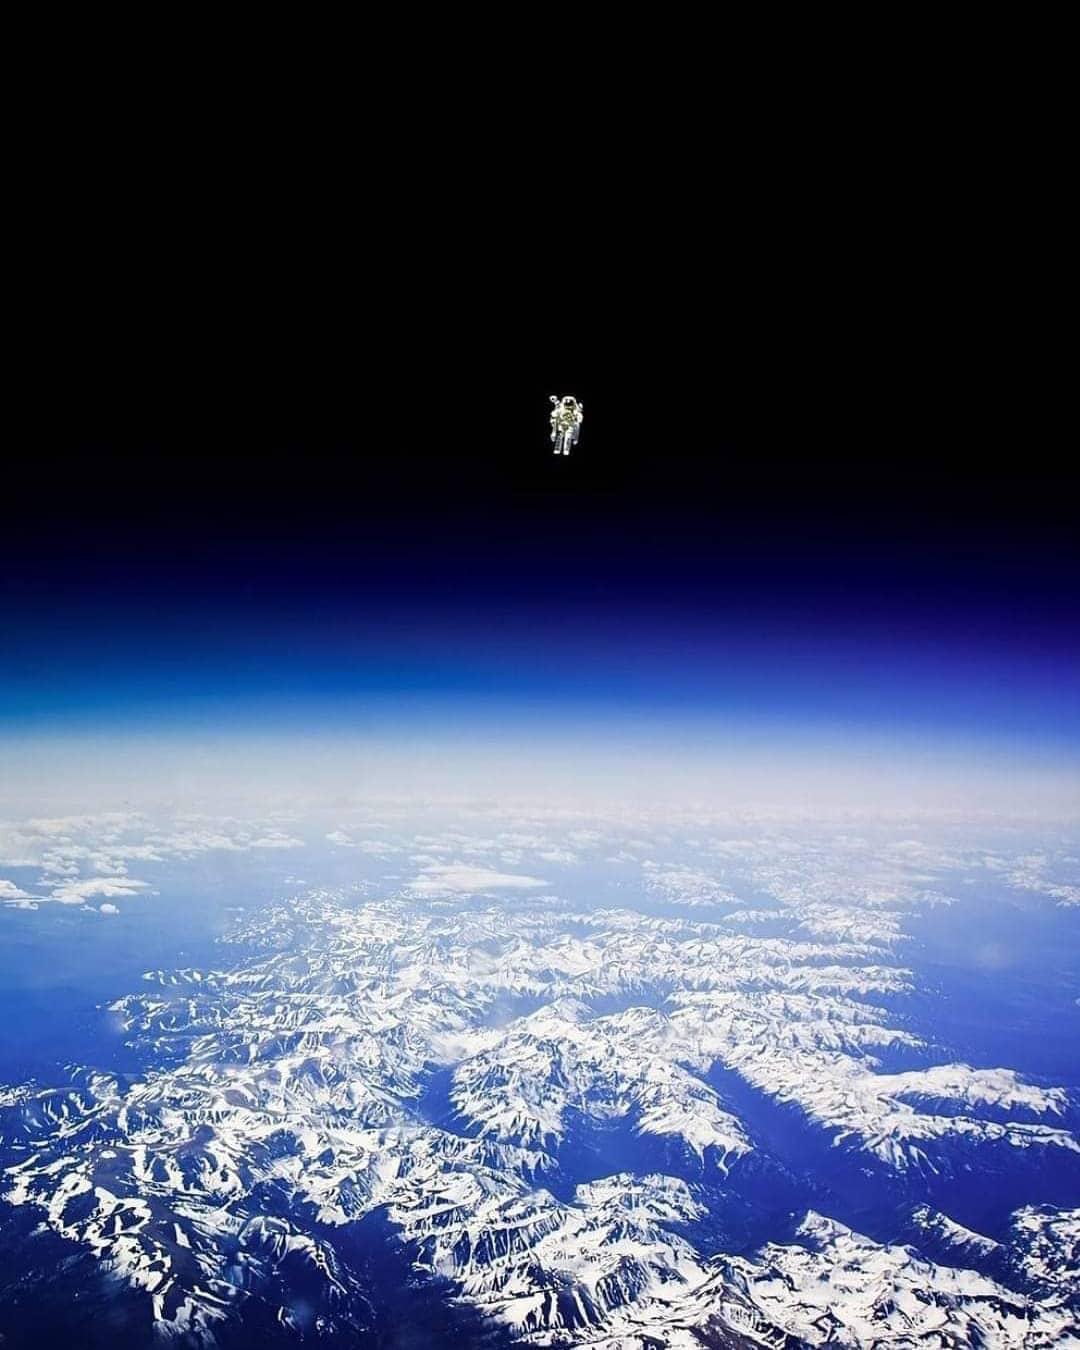 First person to go in space untethered from a shuttle.